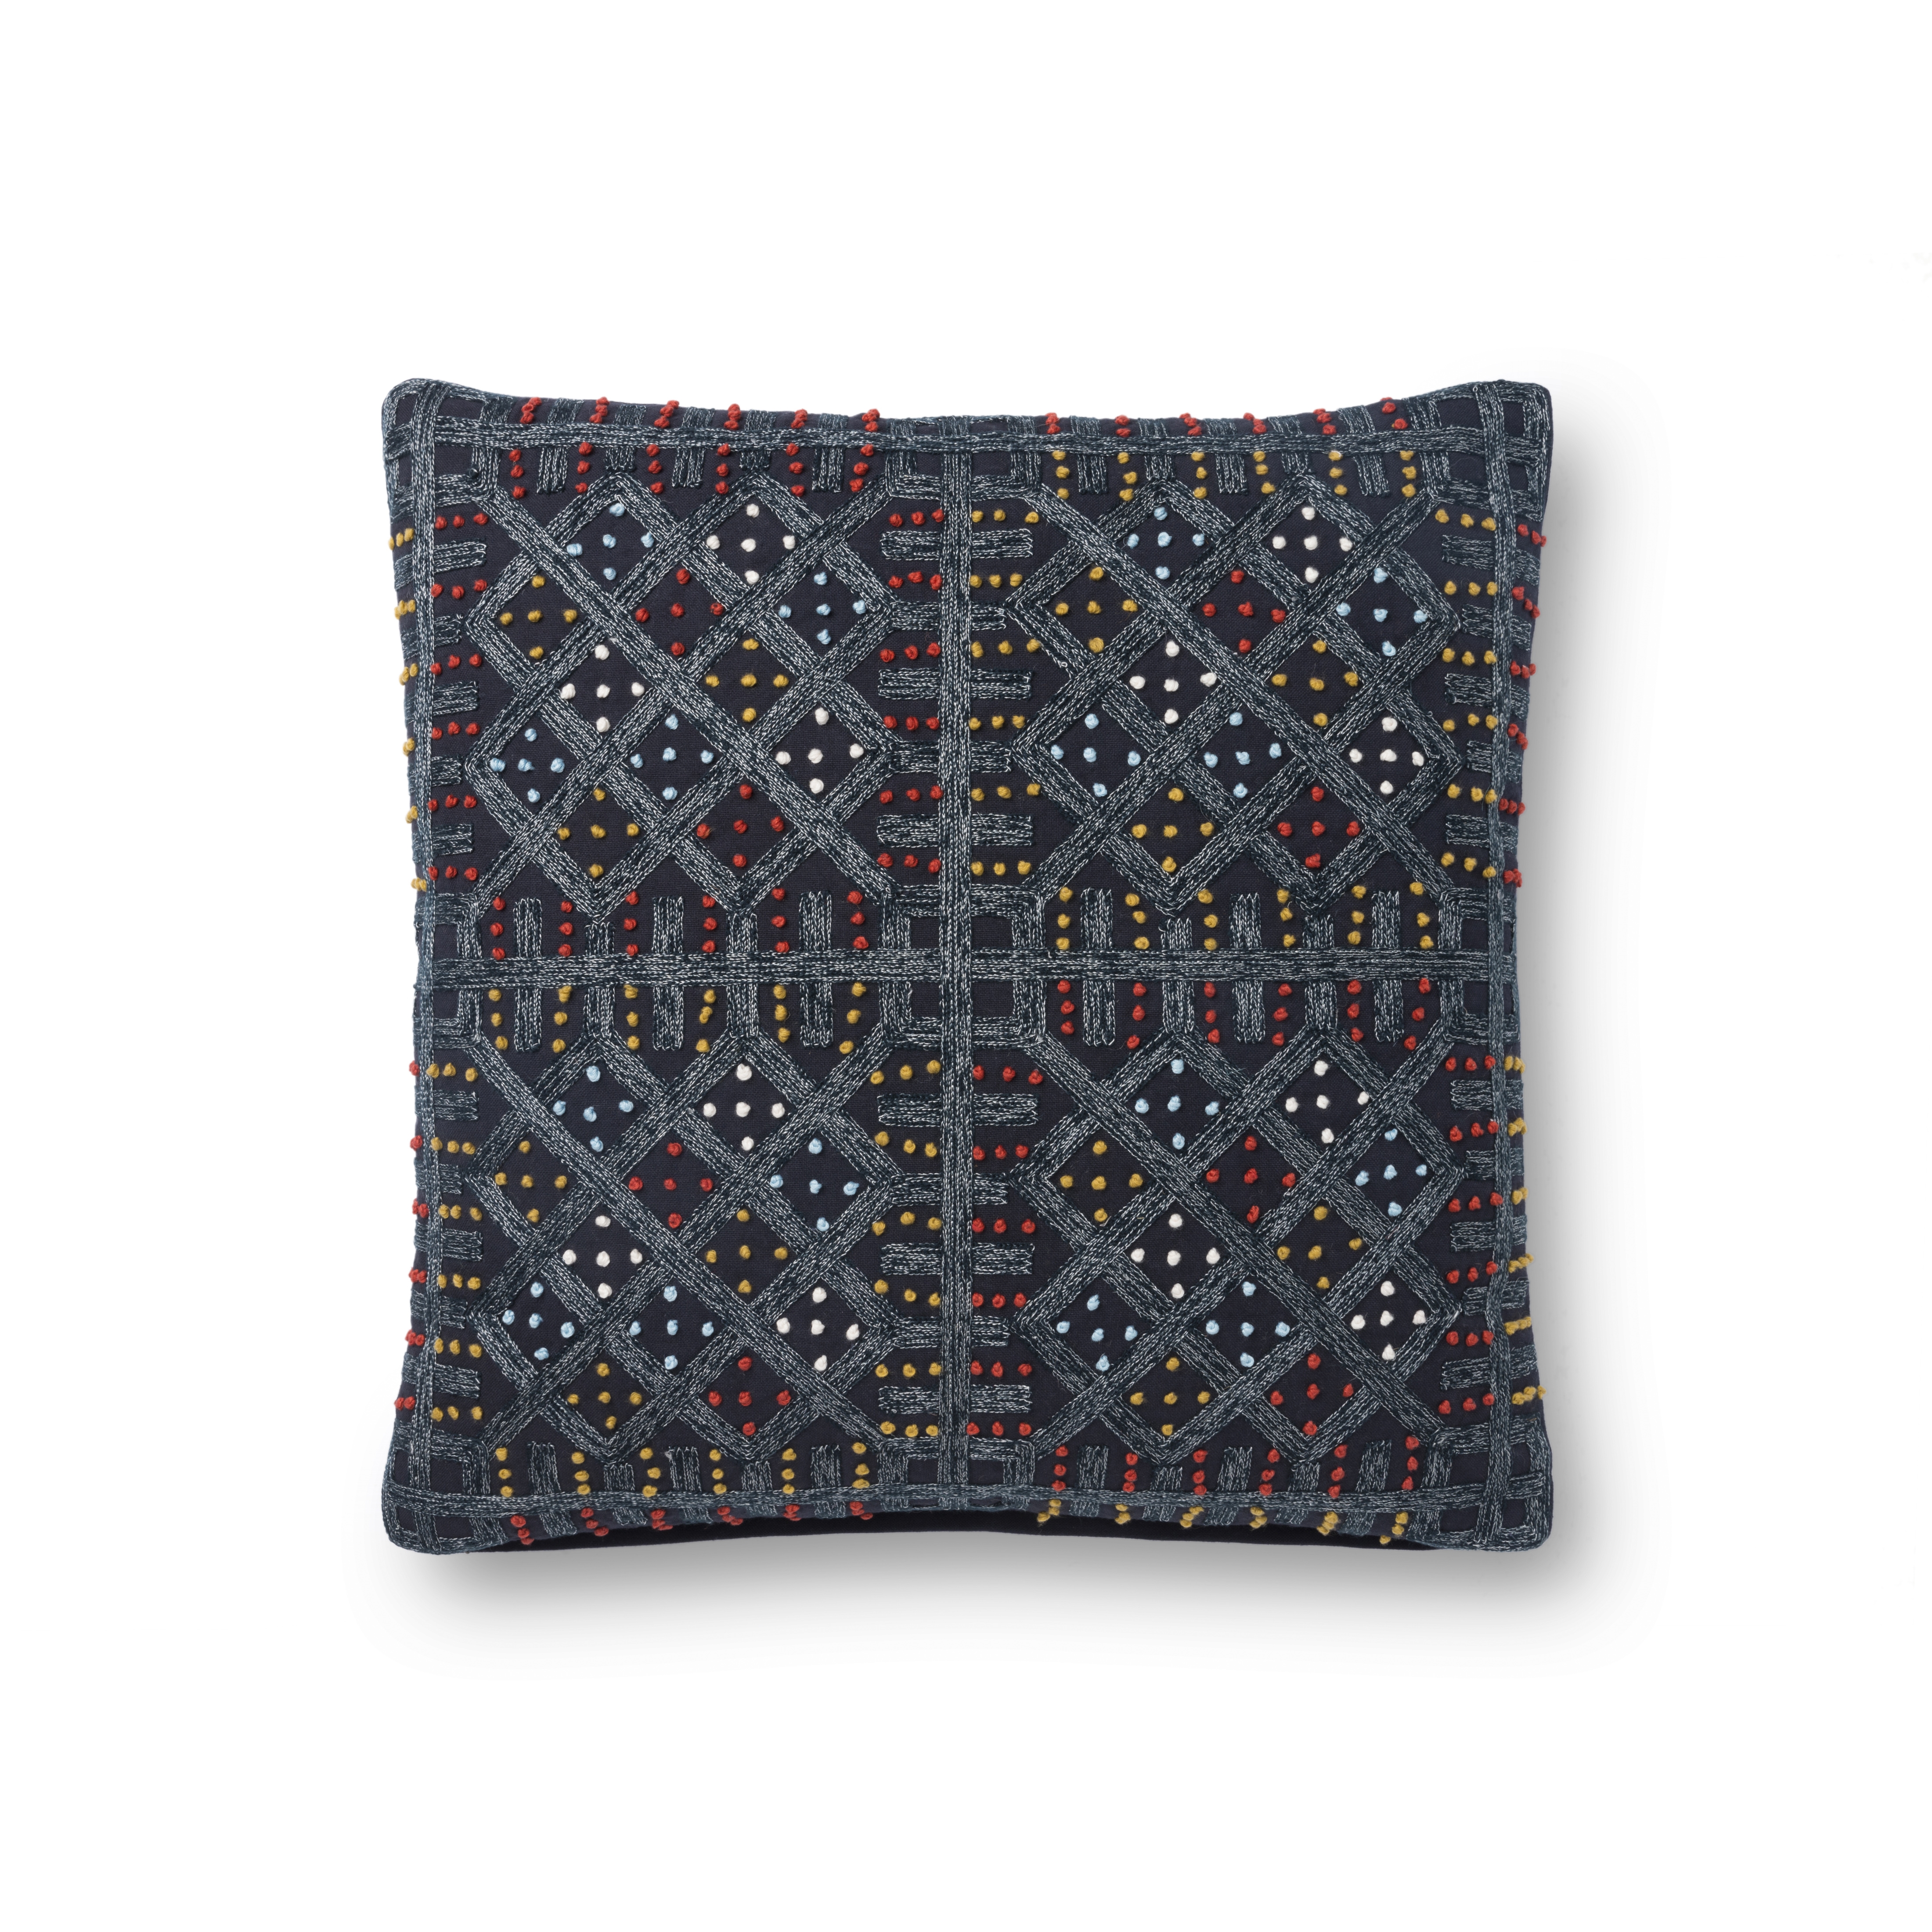 Justina Blakeney x Loloi PILLOWS P0841 Navy / Multi 18" x 18" Cover Only - Image 0